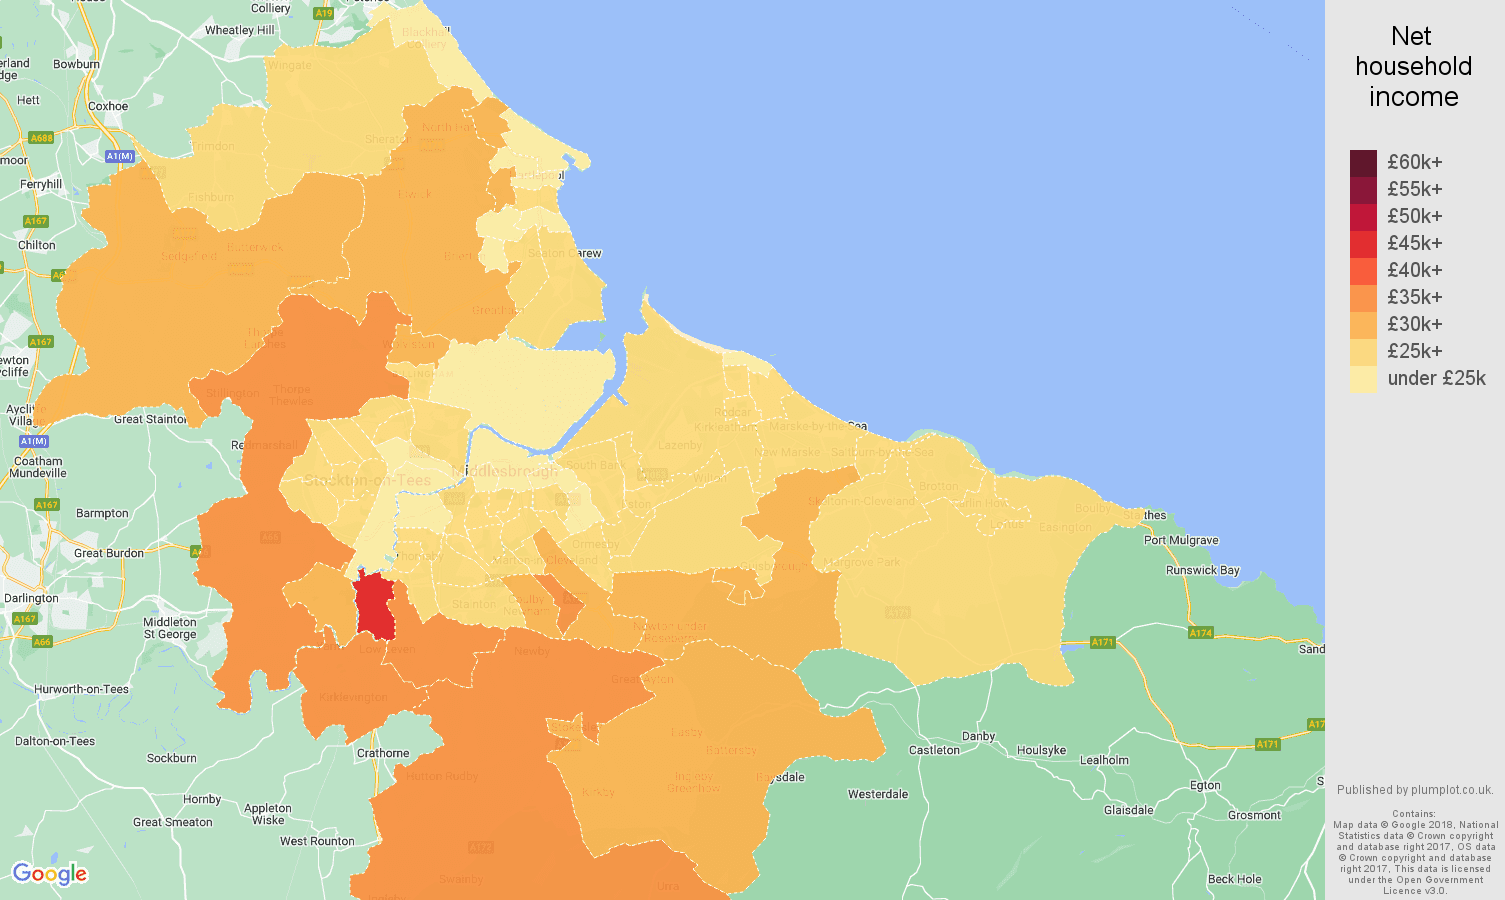 Cleveland net household income map